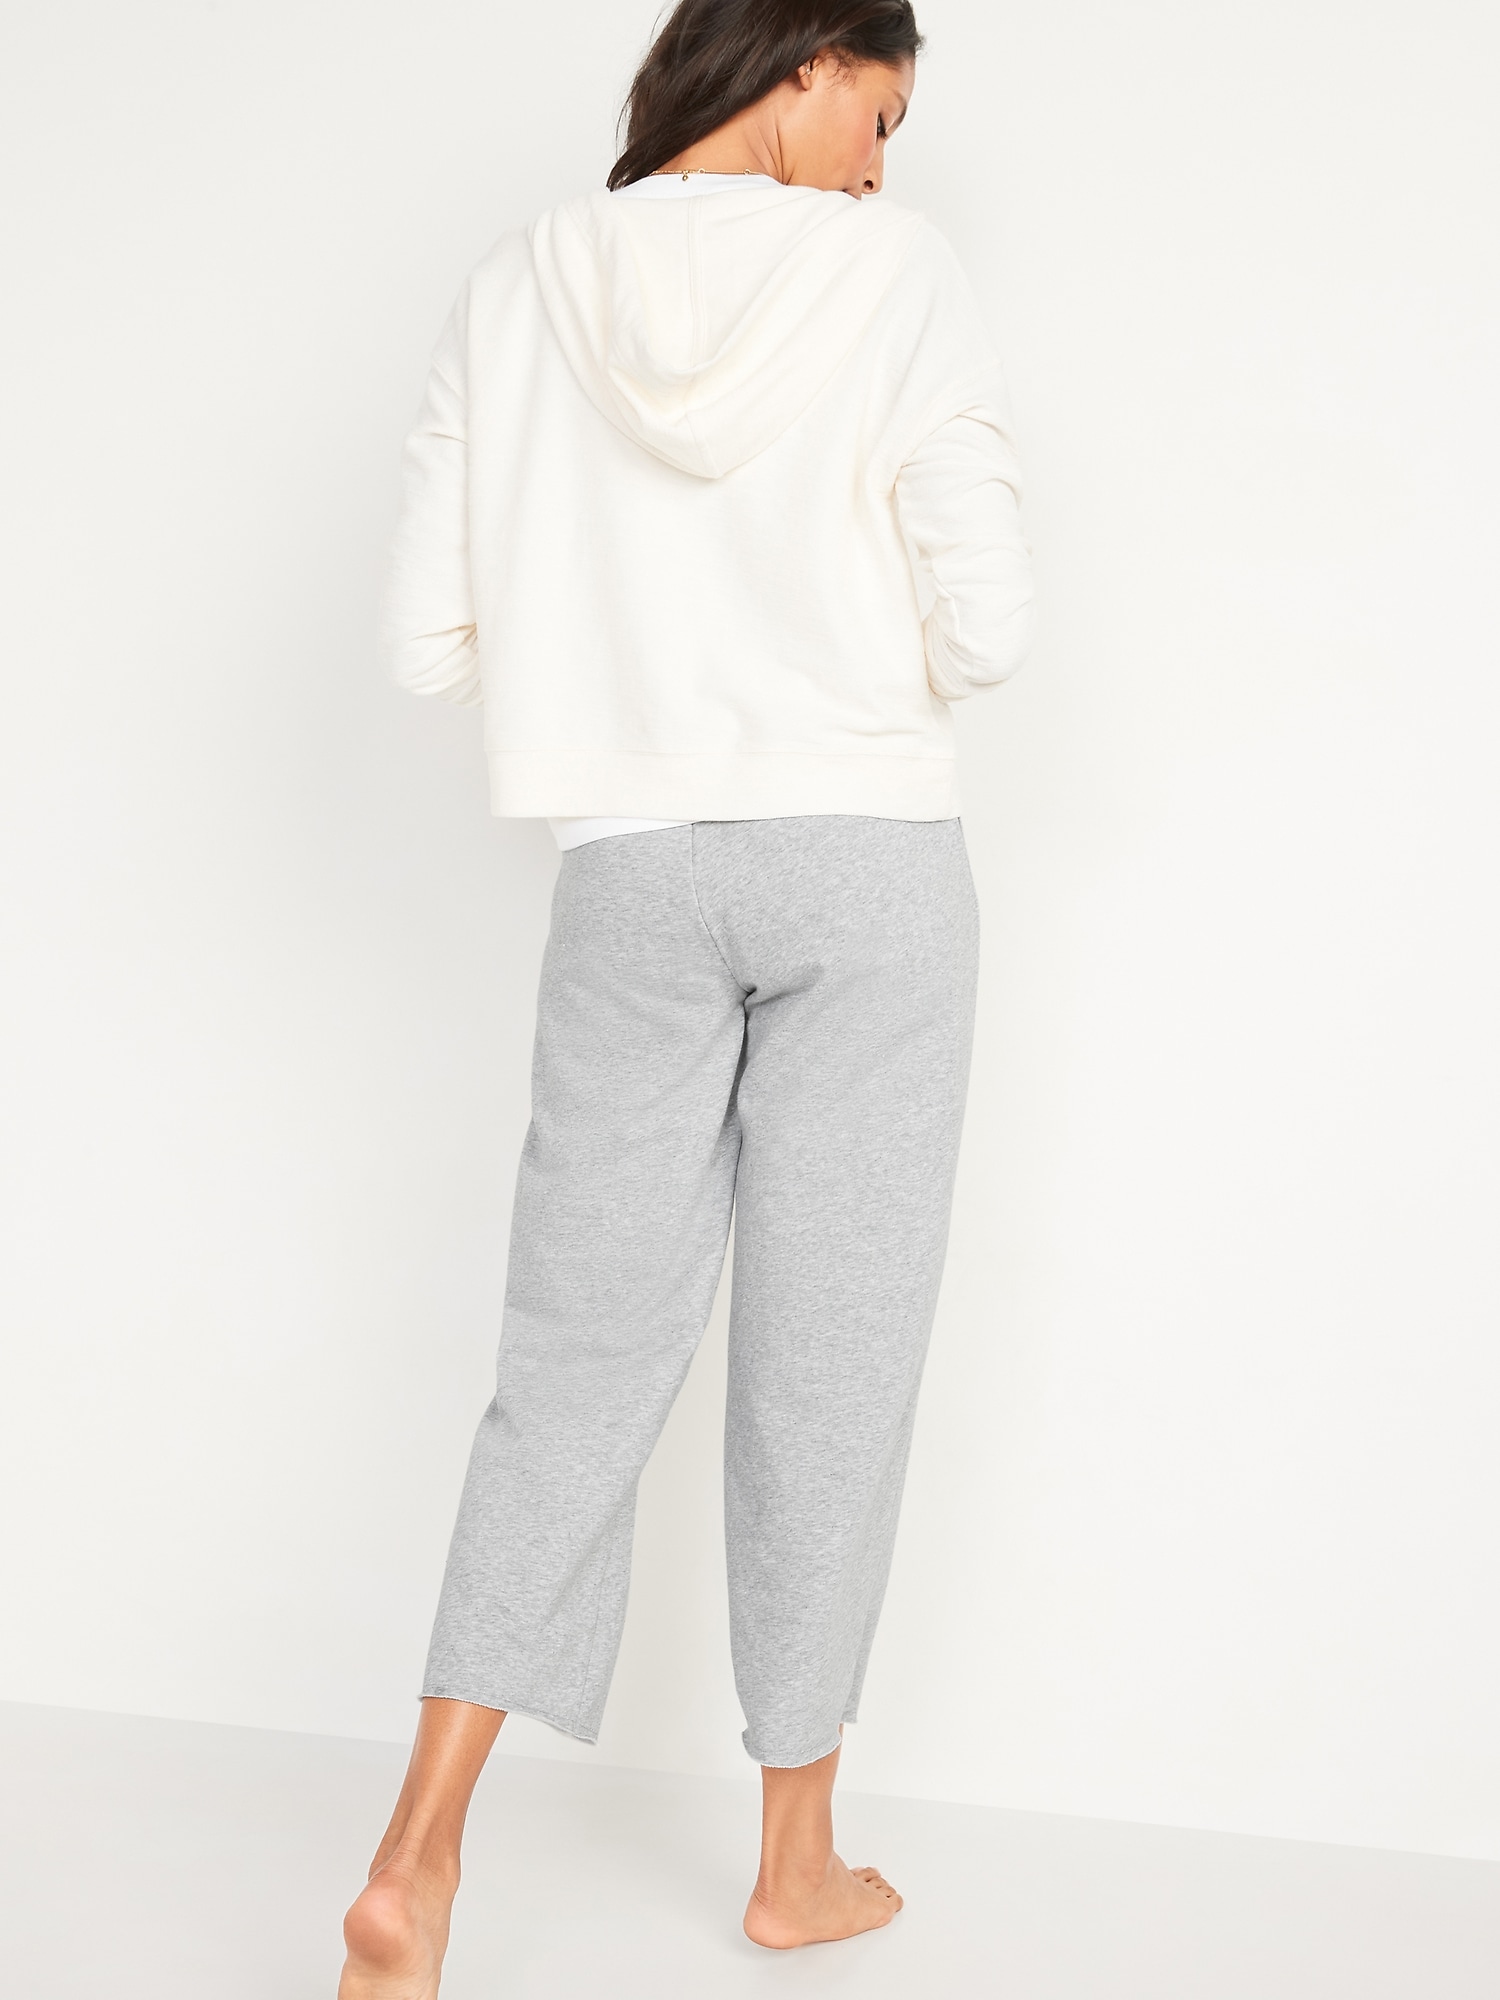 Extra High-Waisted Straight Ankle Sweatpants for Women